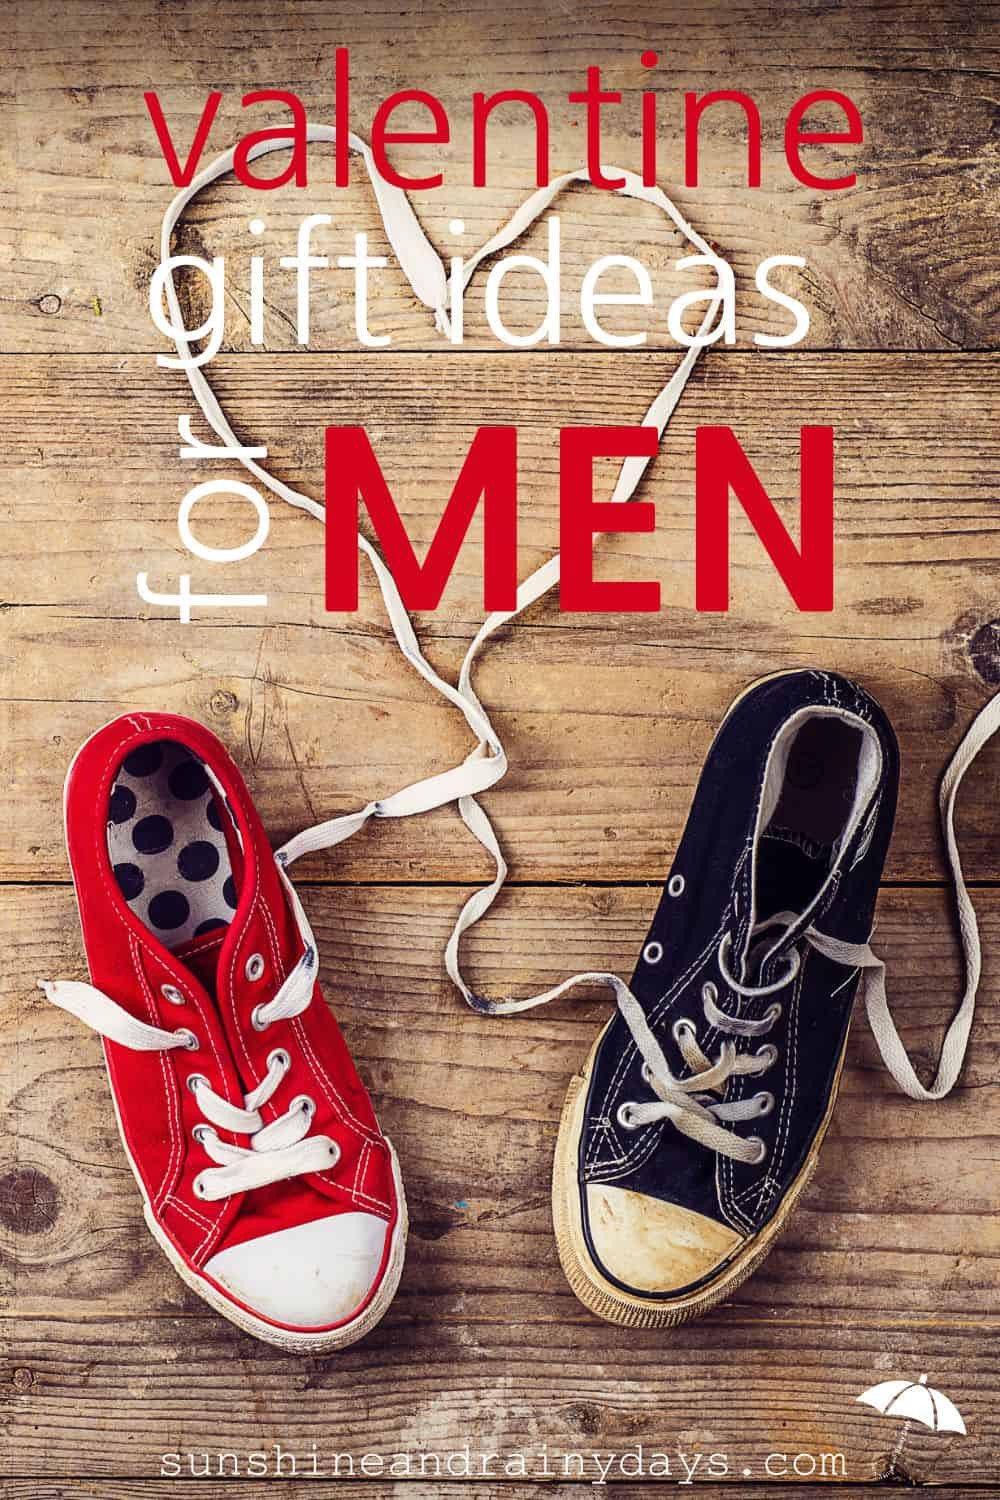 Gift Ideas For Men Valentines Day
 Valentine Gift Ideas For Men Sunshine and Rainy Days